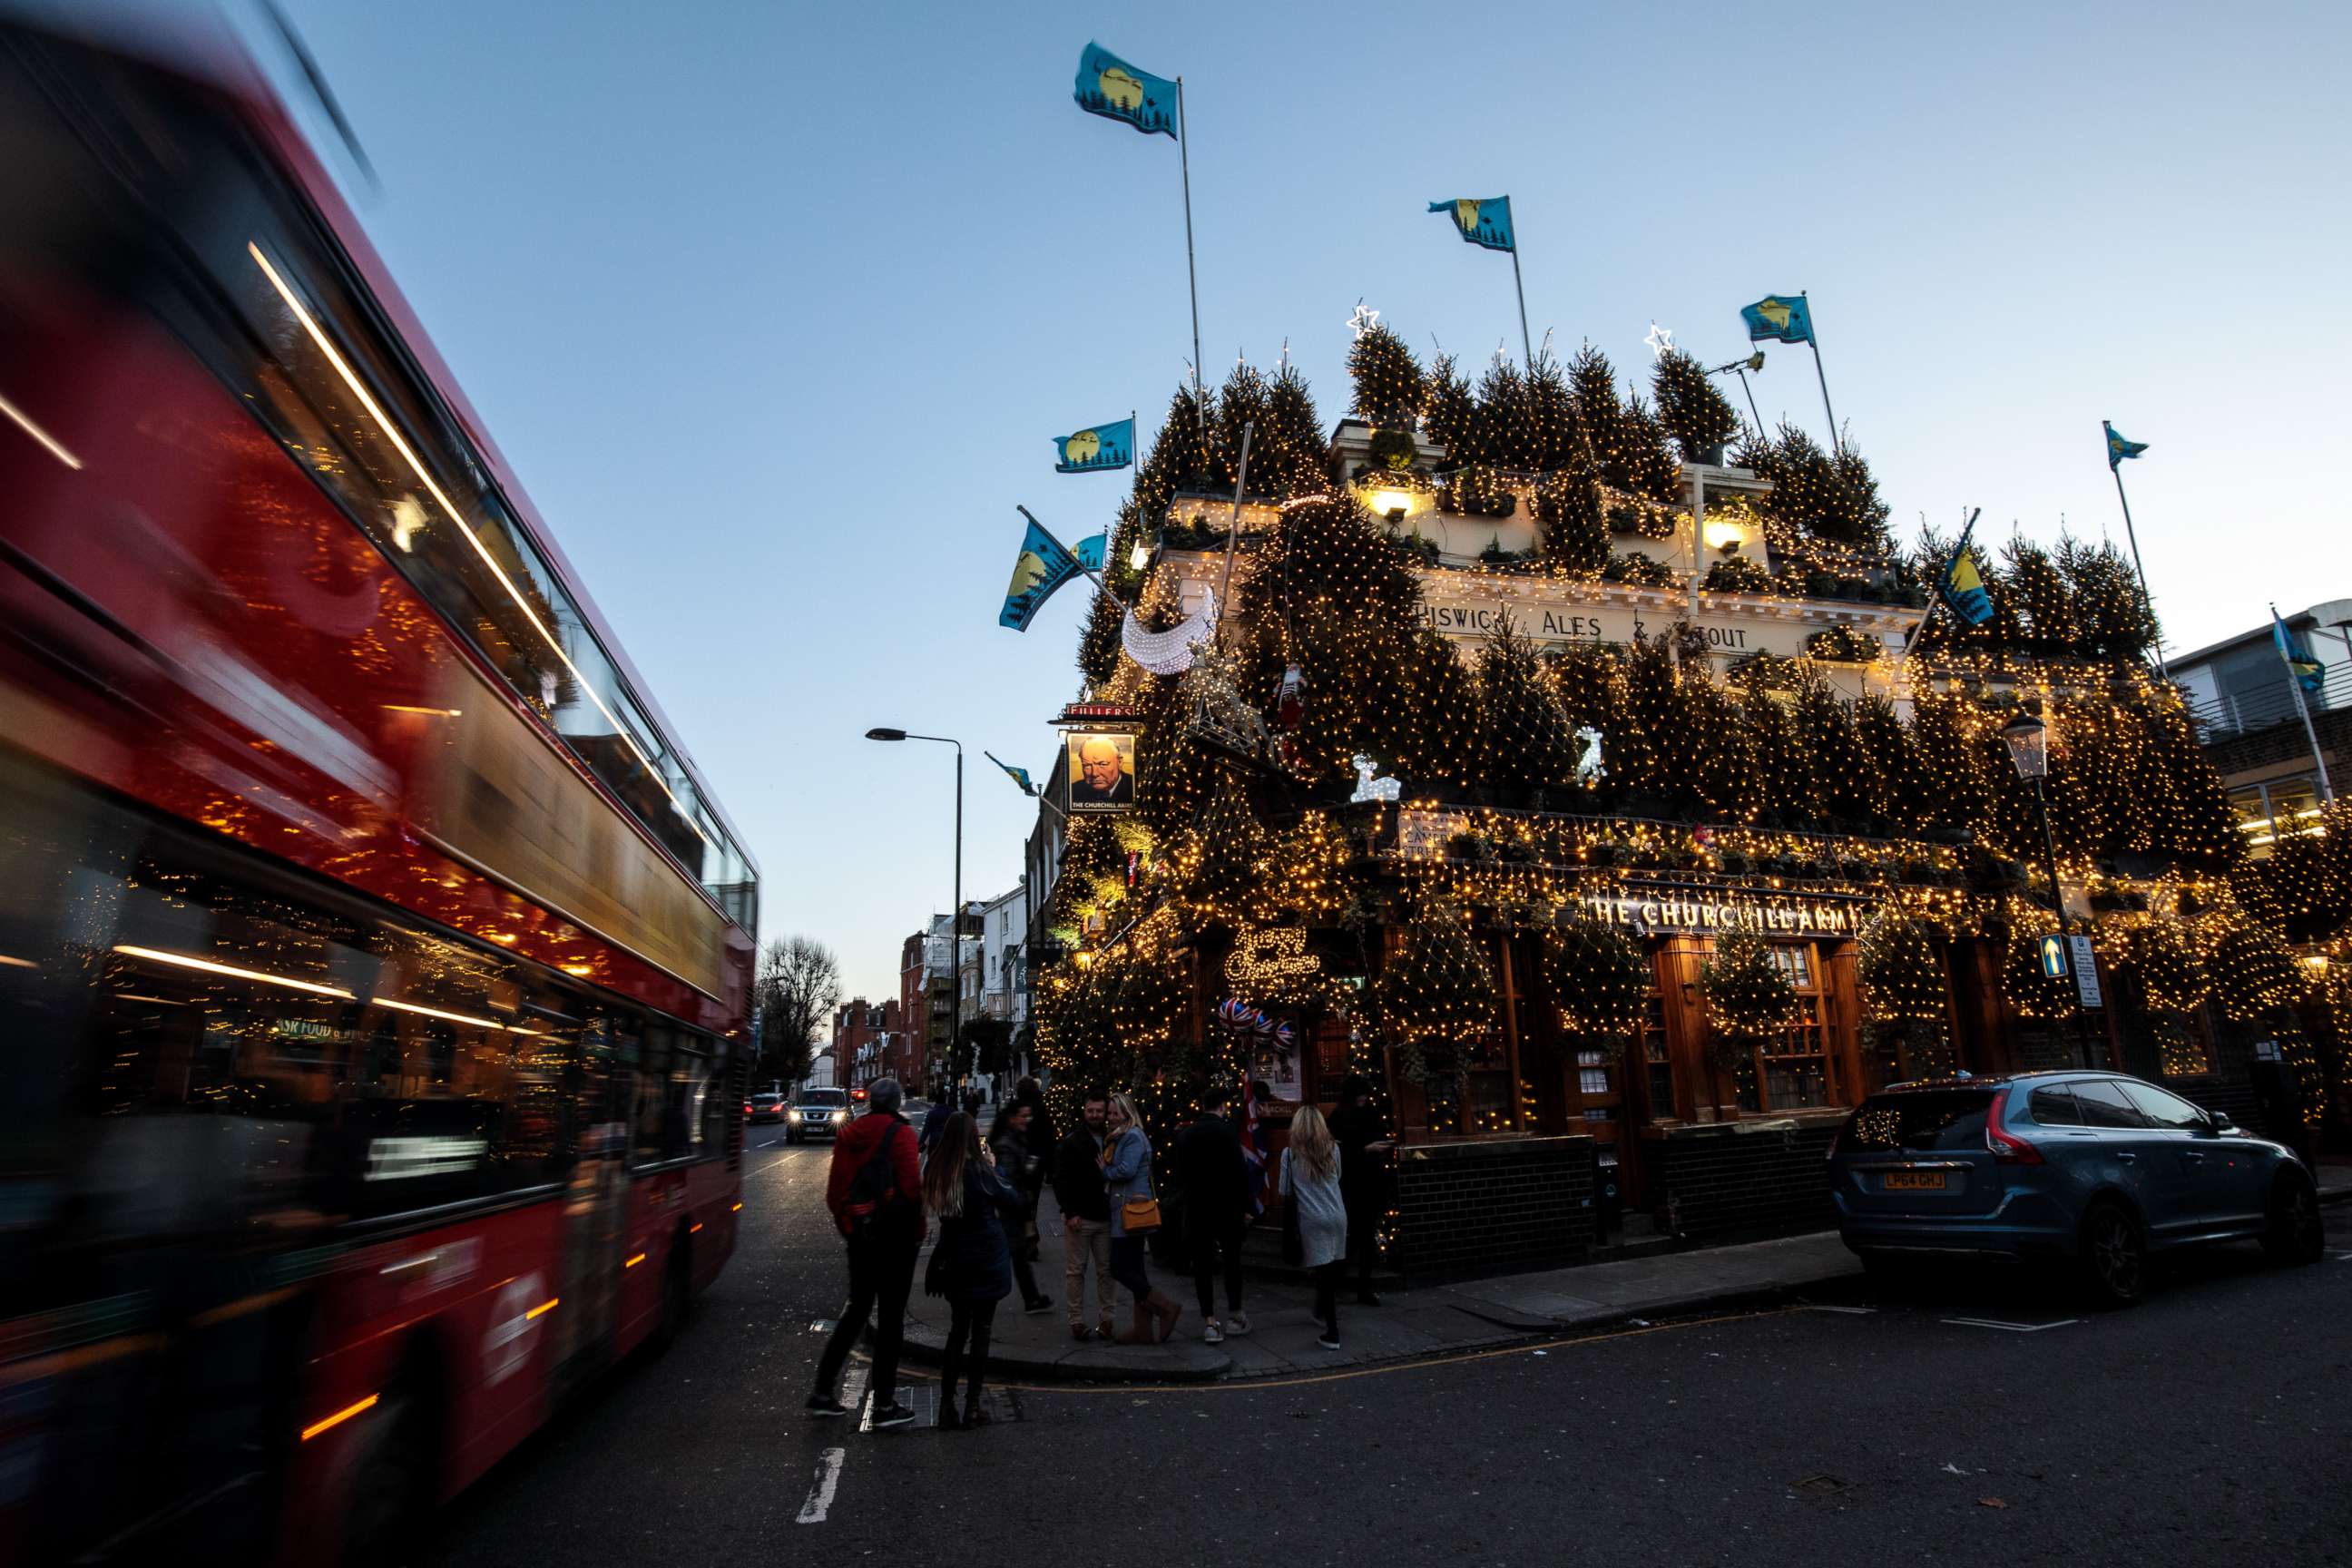 PHOTO: The Churchill Arms pub in London stands adorned with Christmas lights and conifer trees for the Christmas period, Nov. 30, 2018.